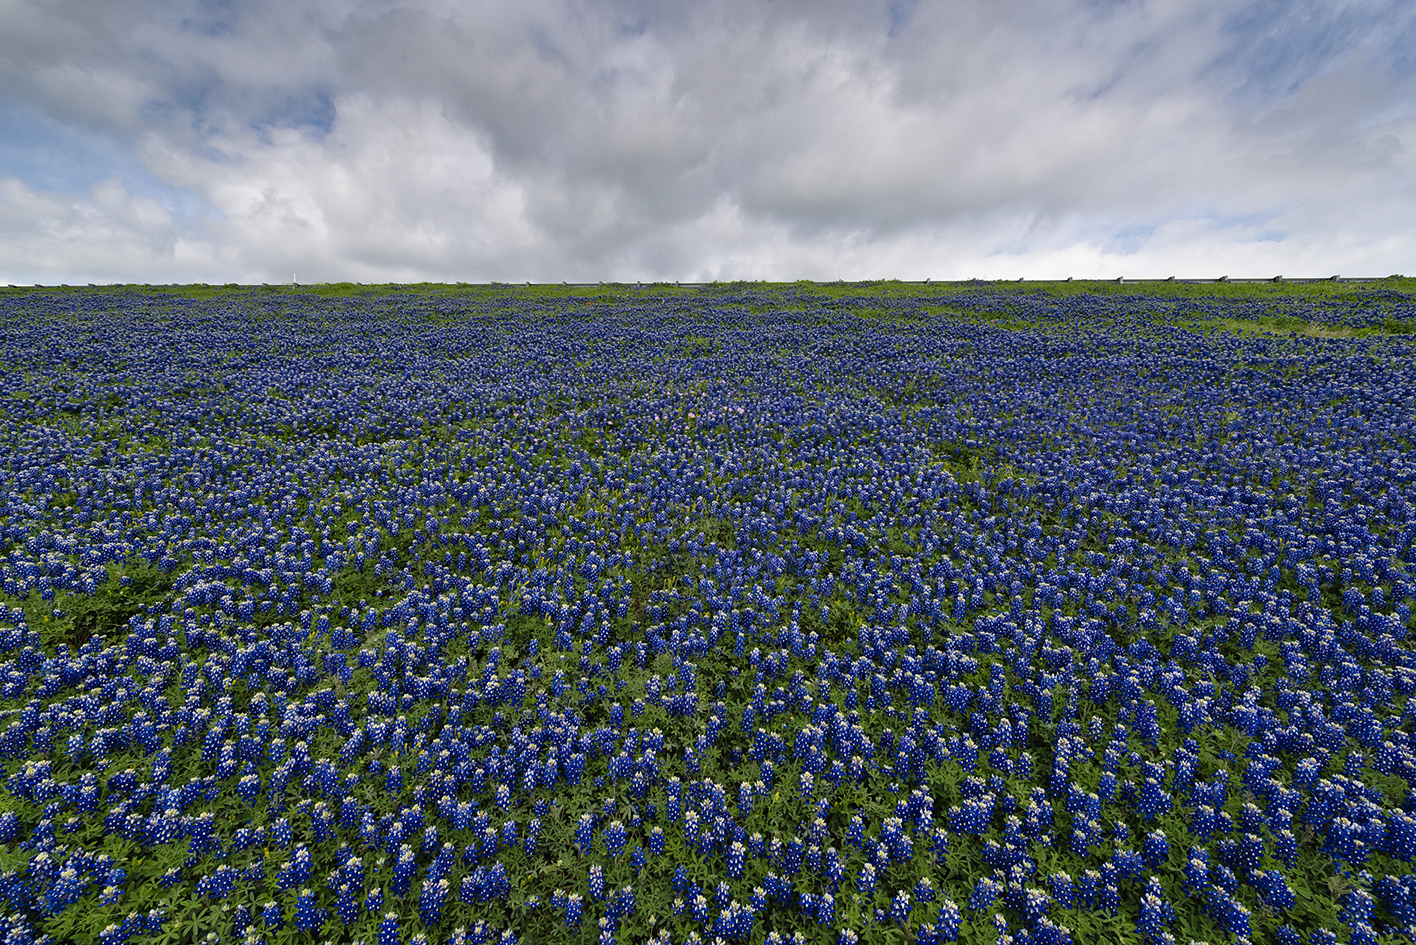 Rise of the Bluebonnets